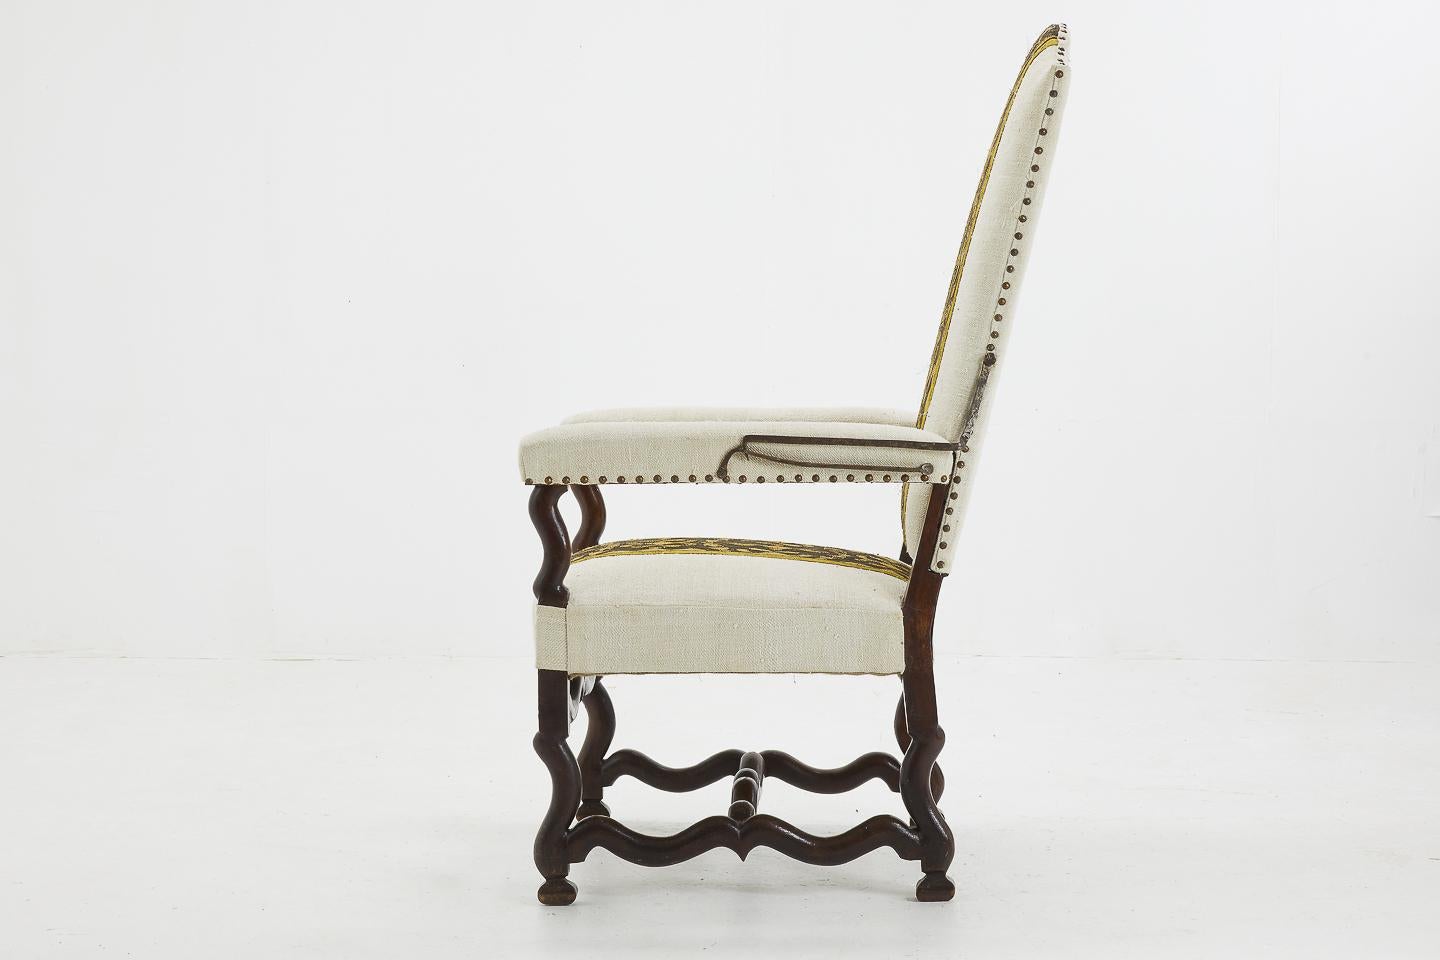 Needlework 18th Century French Walnut Armchair with Metal and Silk Thread Panel For Sale